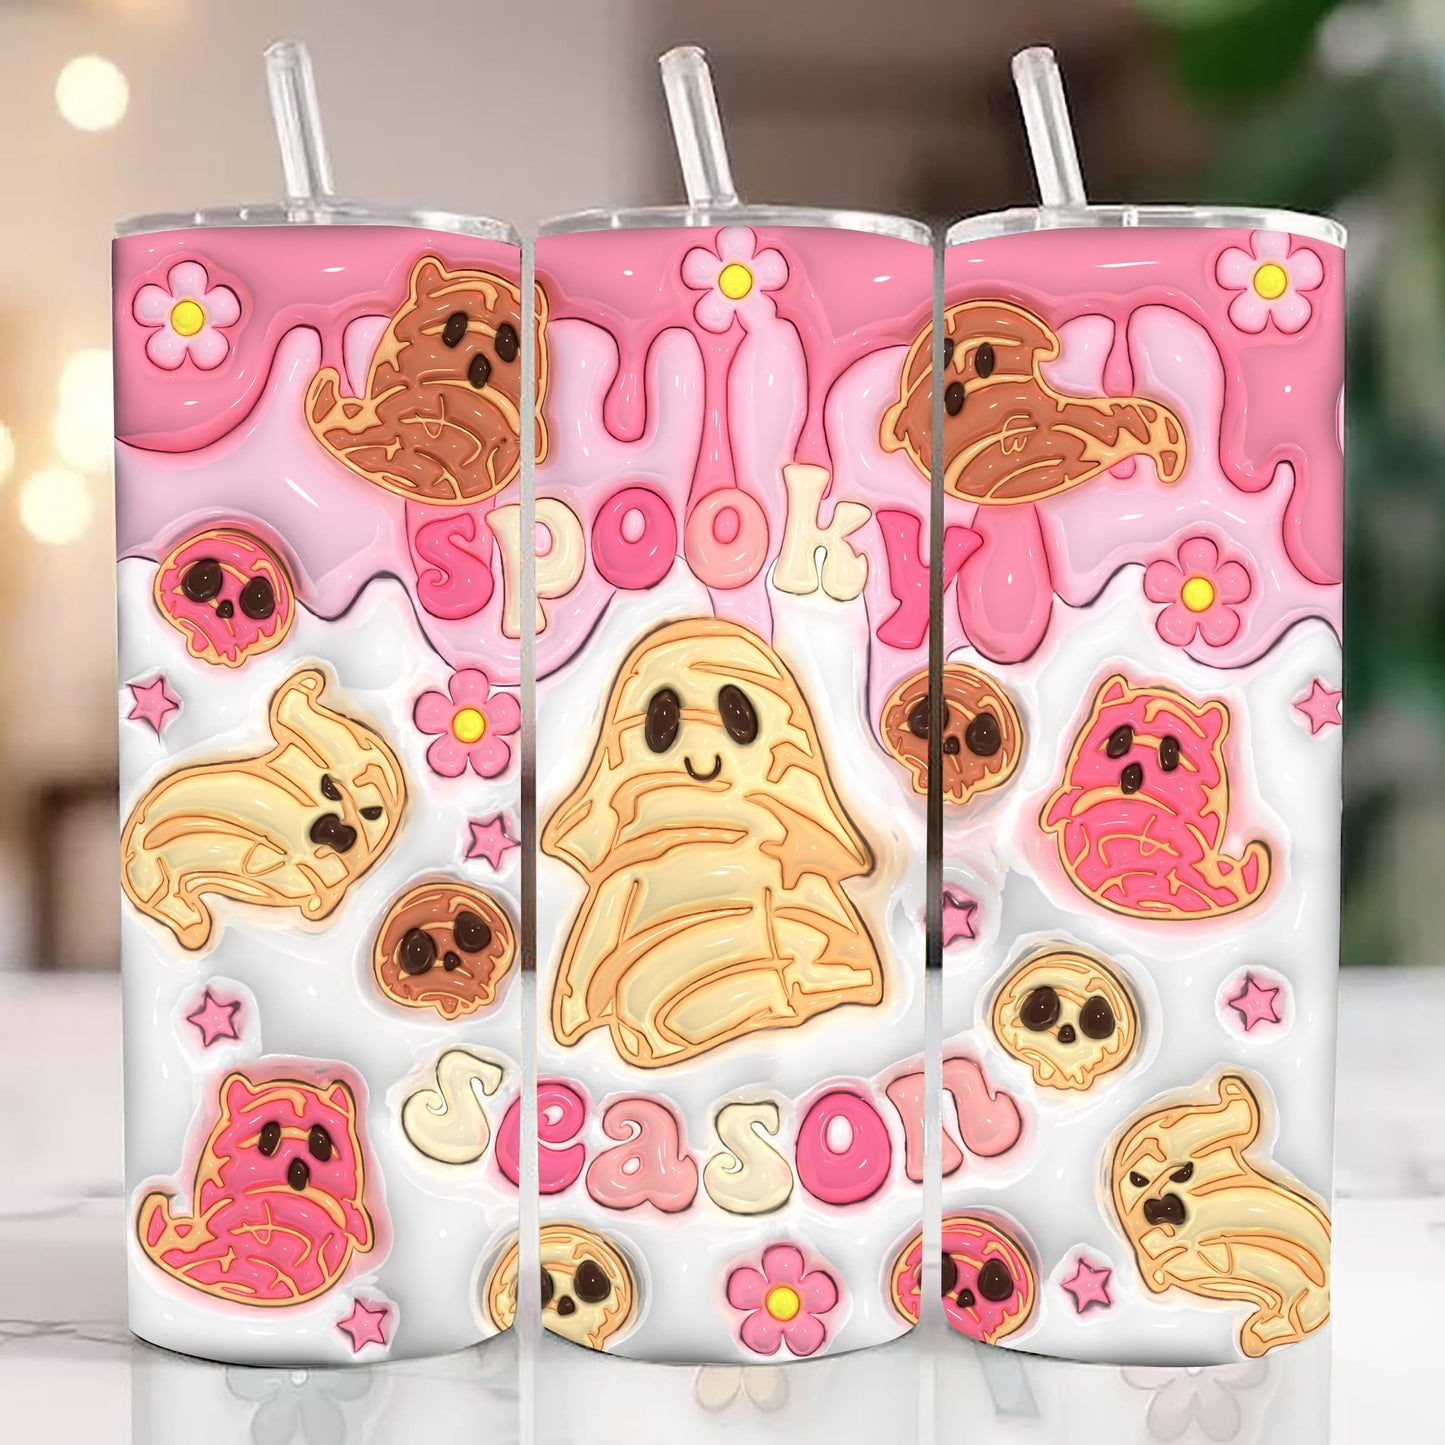 3D Spooky Conchas Inflated Tumbler Wrap, Mexican Pan Dulce Ghost, Puffy Halloween Conchas Ghost Tumbler Wrap, Mexican Conchas, Spooky Vibes - VartDigitals